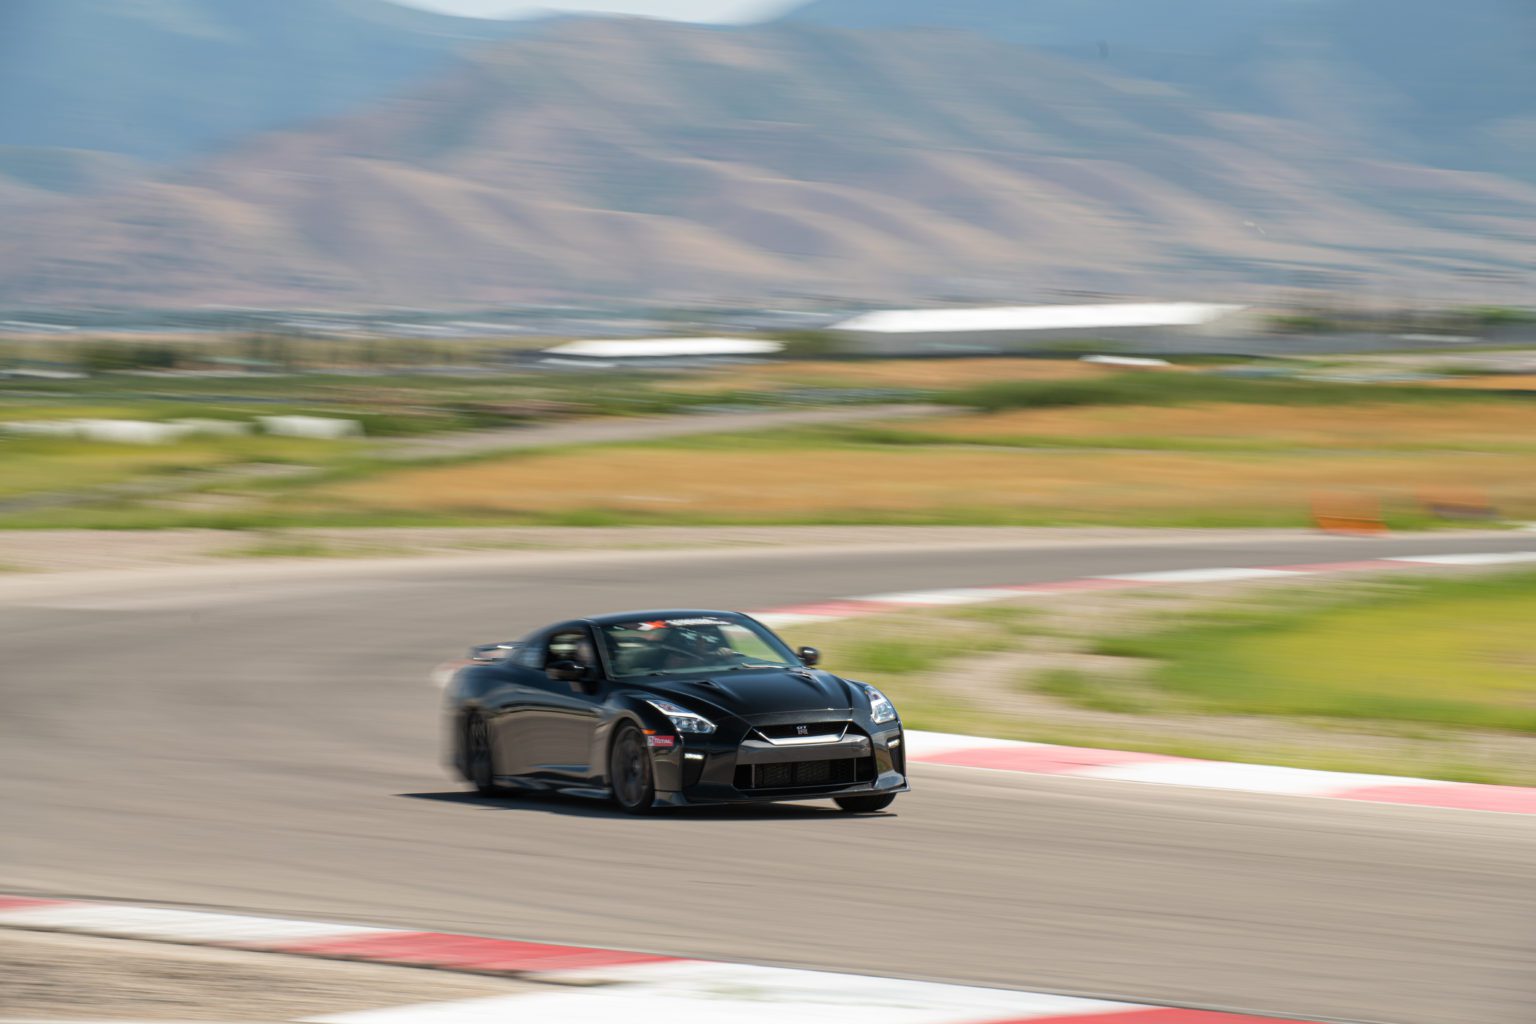 Xtreme Xperience's GTR driving on a racetrack.